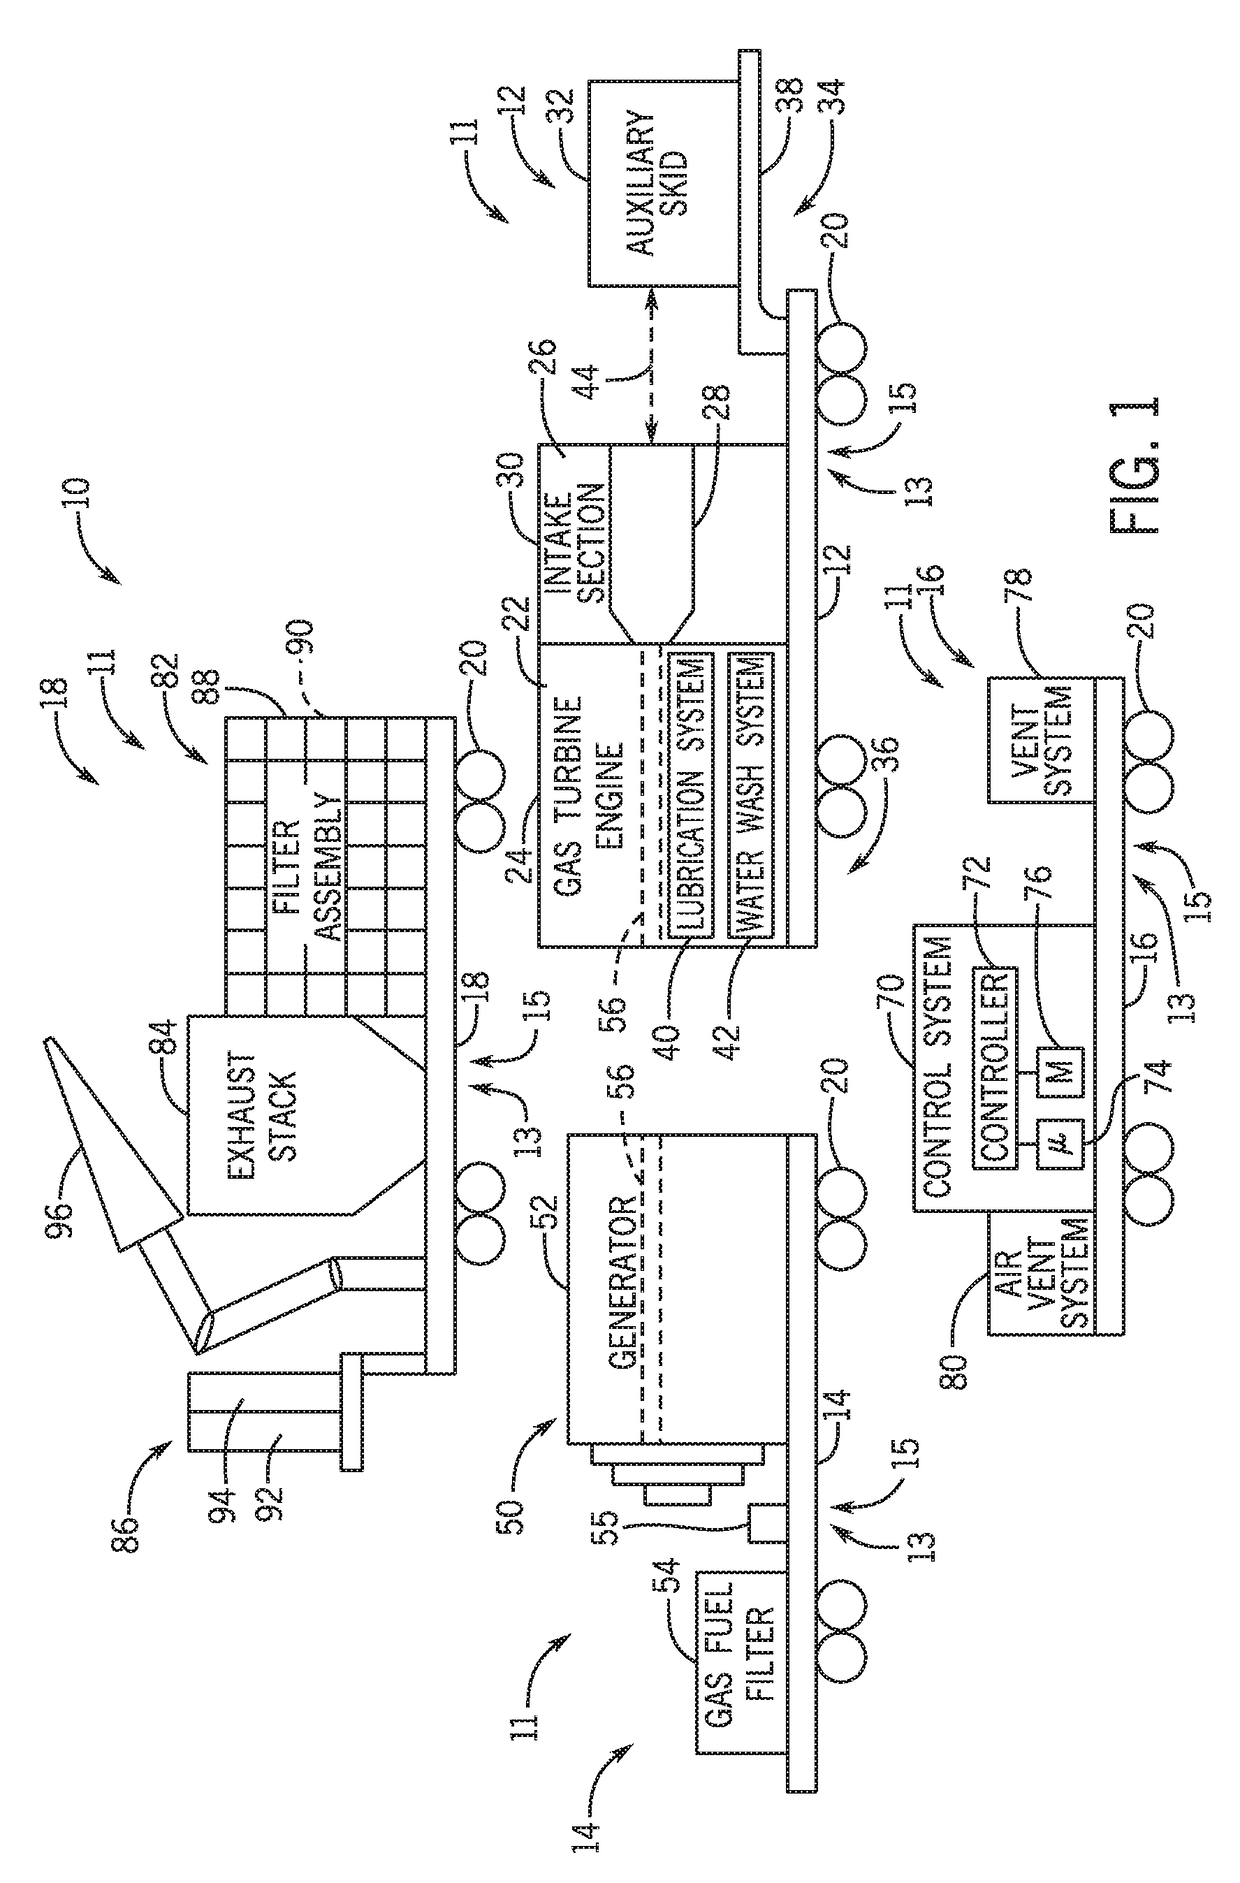 Systems and methods for a mobile power plant with improved mobility and reduced trailer count